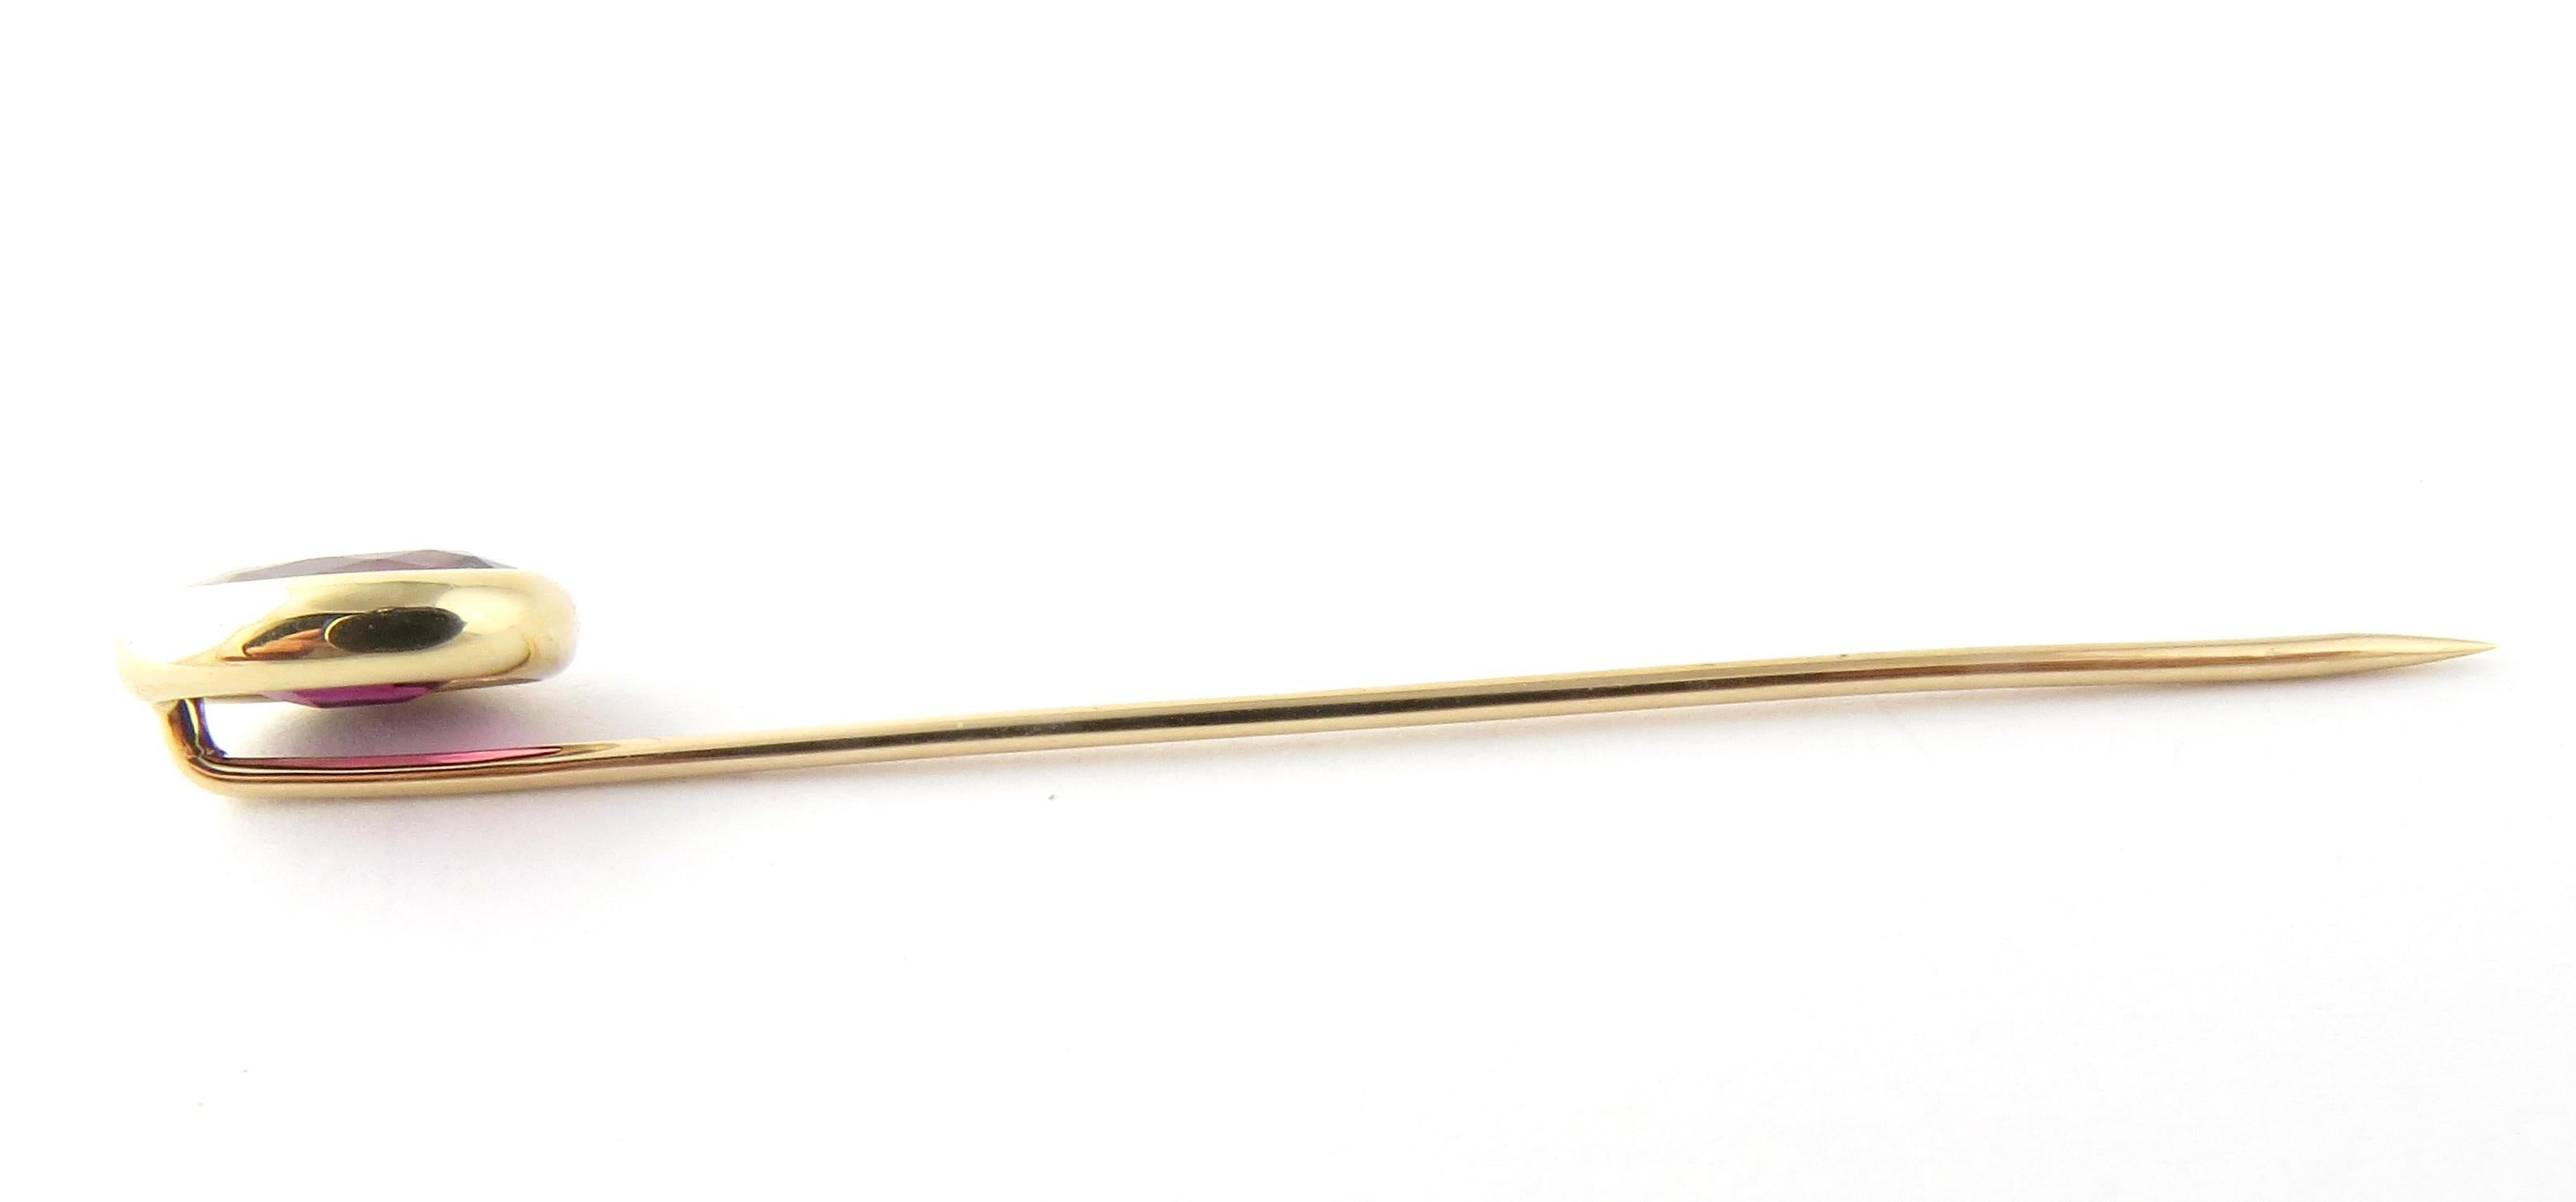 Vintage 14 Karat Yellow Gold Amethyst Stick Pin

This lovely stick pin features one oval amethyst (12 mm x 9 mm) set in classic 14K yellow gold.

Size: 64 mm x 9 mm

Weight: 1.4 dwt. / 2.2 gr.

Acid tested for 14K gold.

Very good condition,